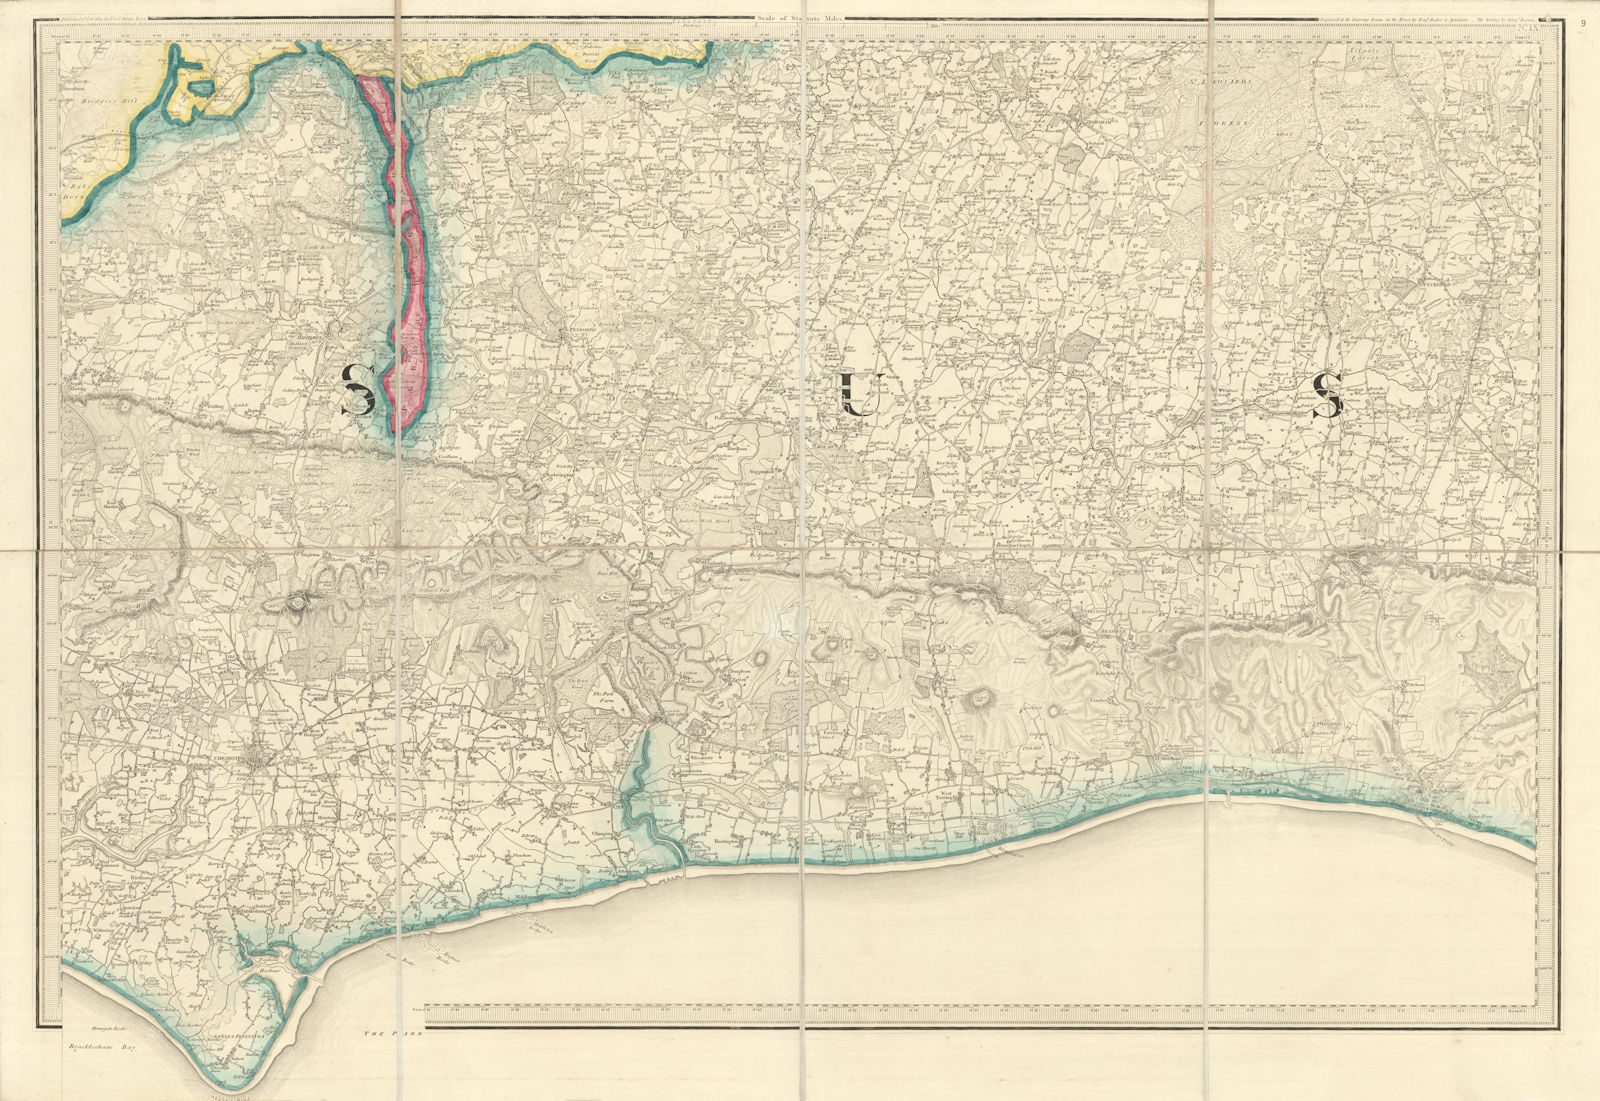 OS #9 Sussex Coast & South Downs. Brighton Arundel Chichester Worthing 1813 map